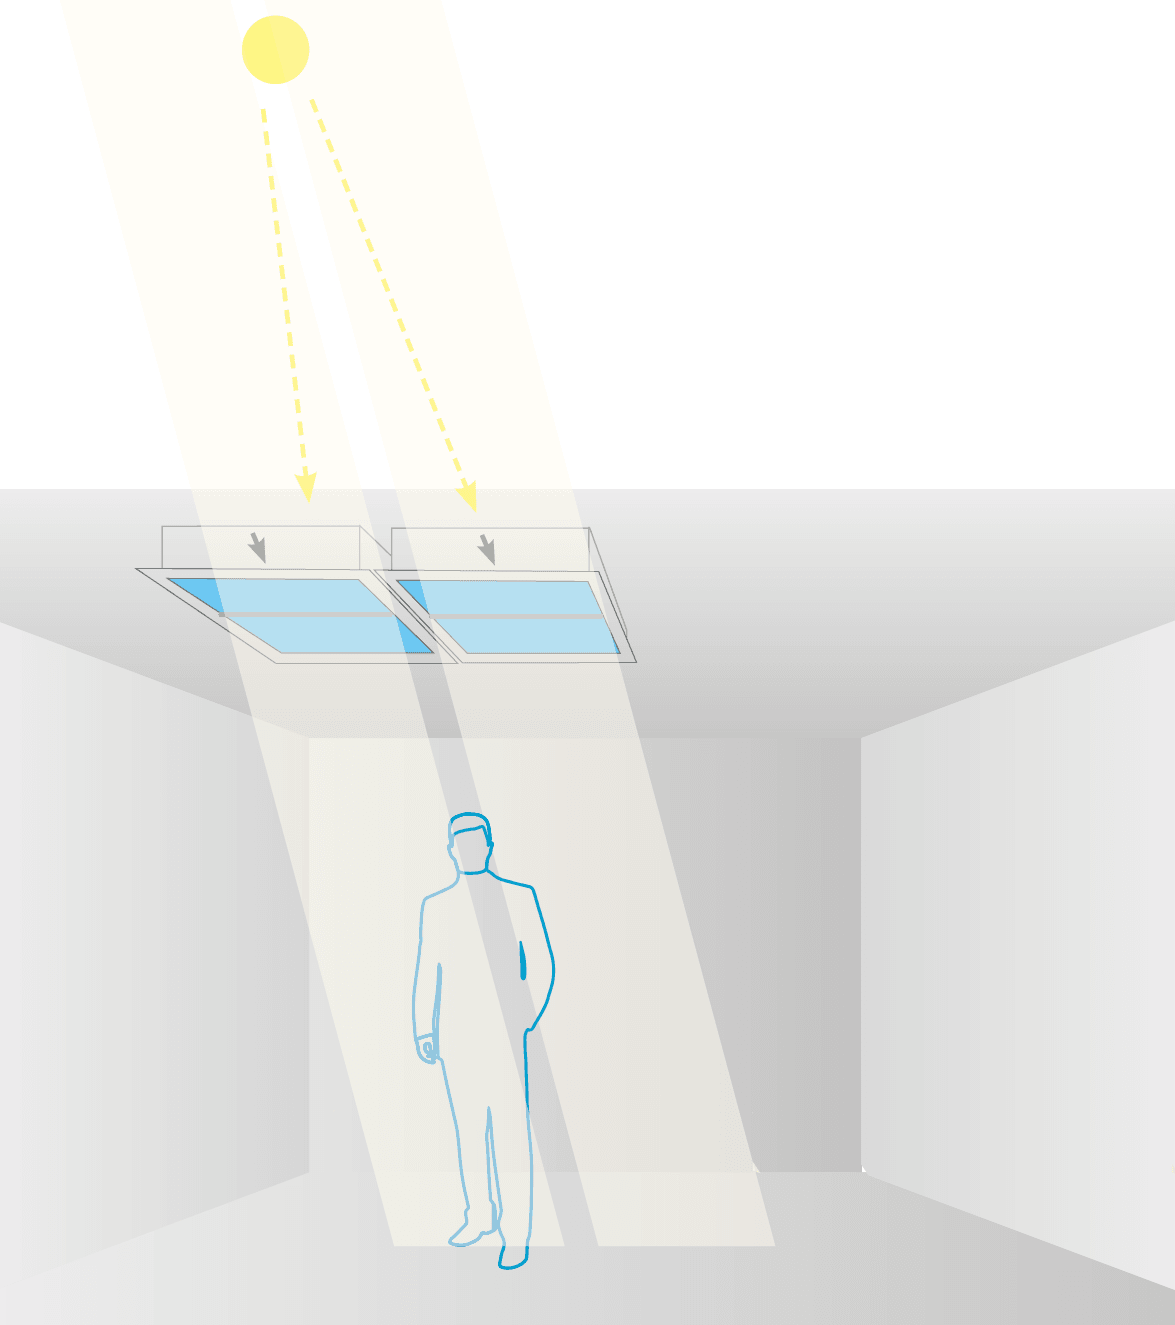 Arranging multiple Innerscene Virtual Sun Model A7 fixtures as close together as possible in a line or grid give the appearance of a single continuous larger sky light